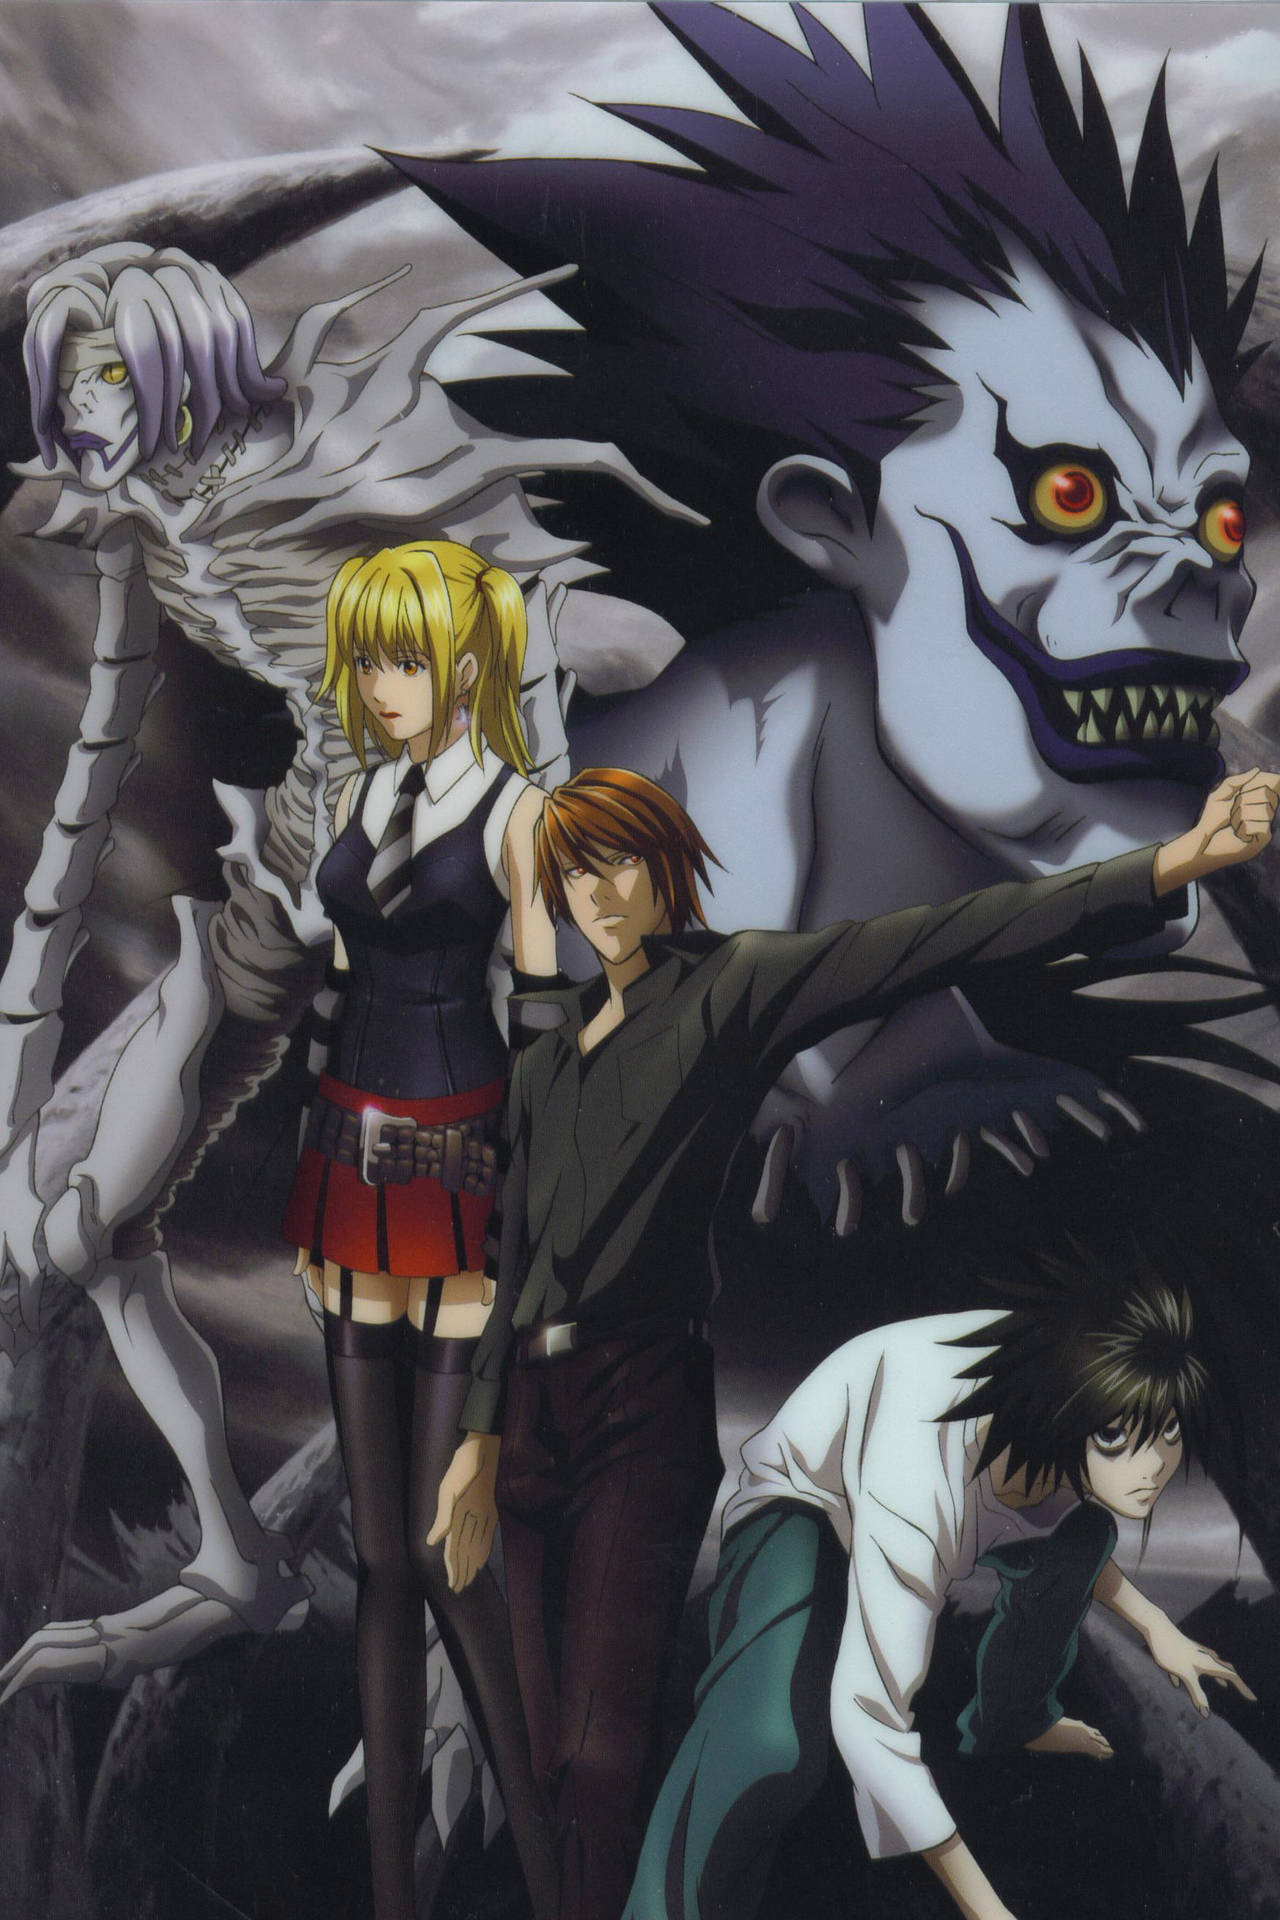 Free Death Note Phone Wallpaper Downloads, Death Note Phone Wallpaper for FREE